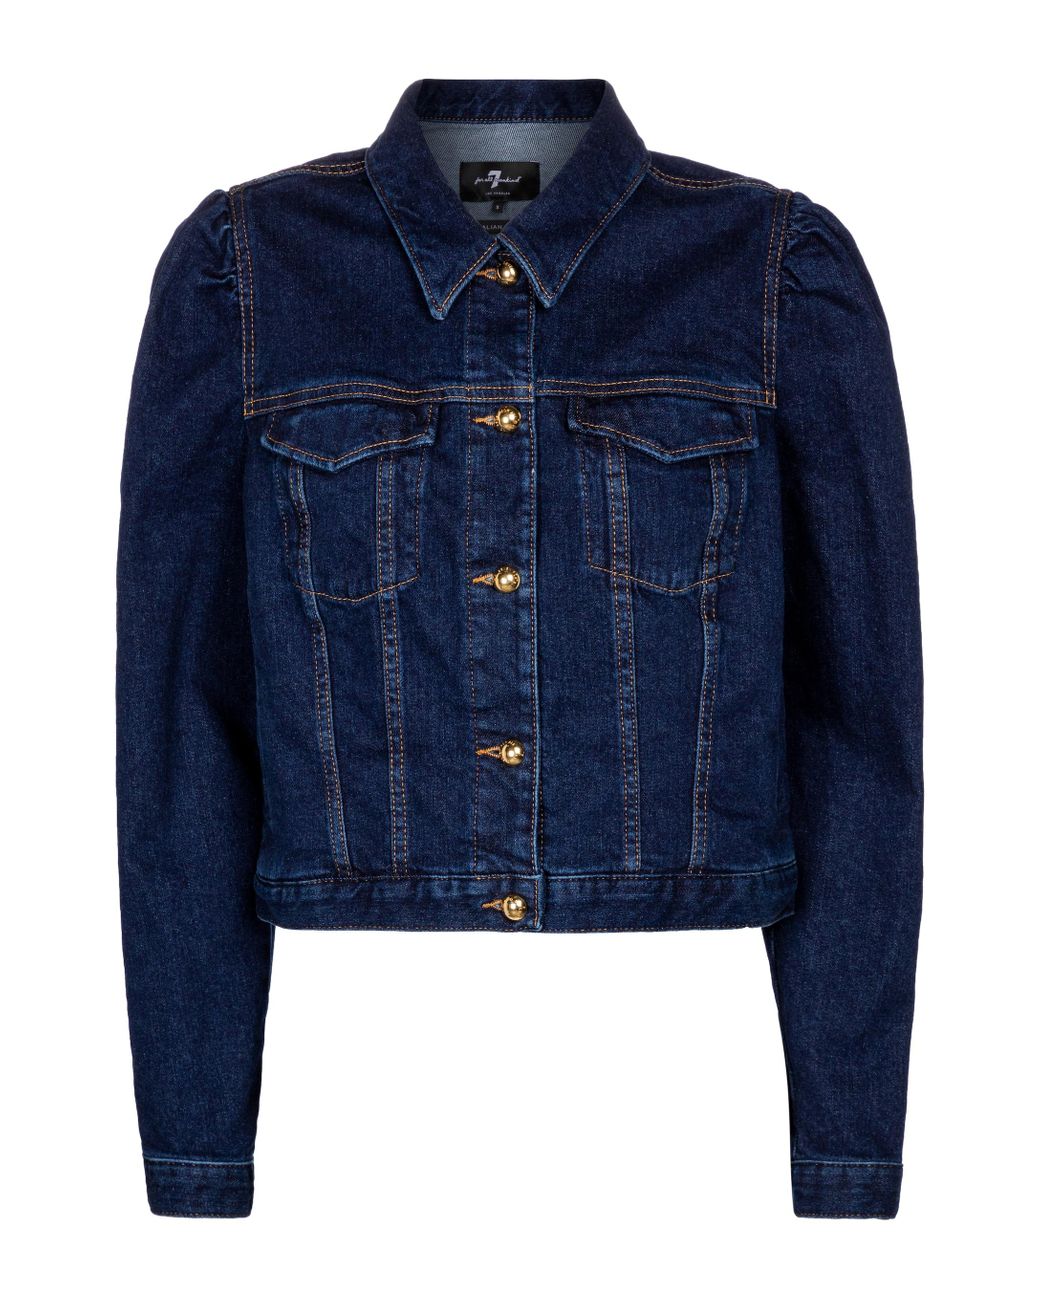 7 For All Mankind Denim Jacket in Blue - Lyst